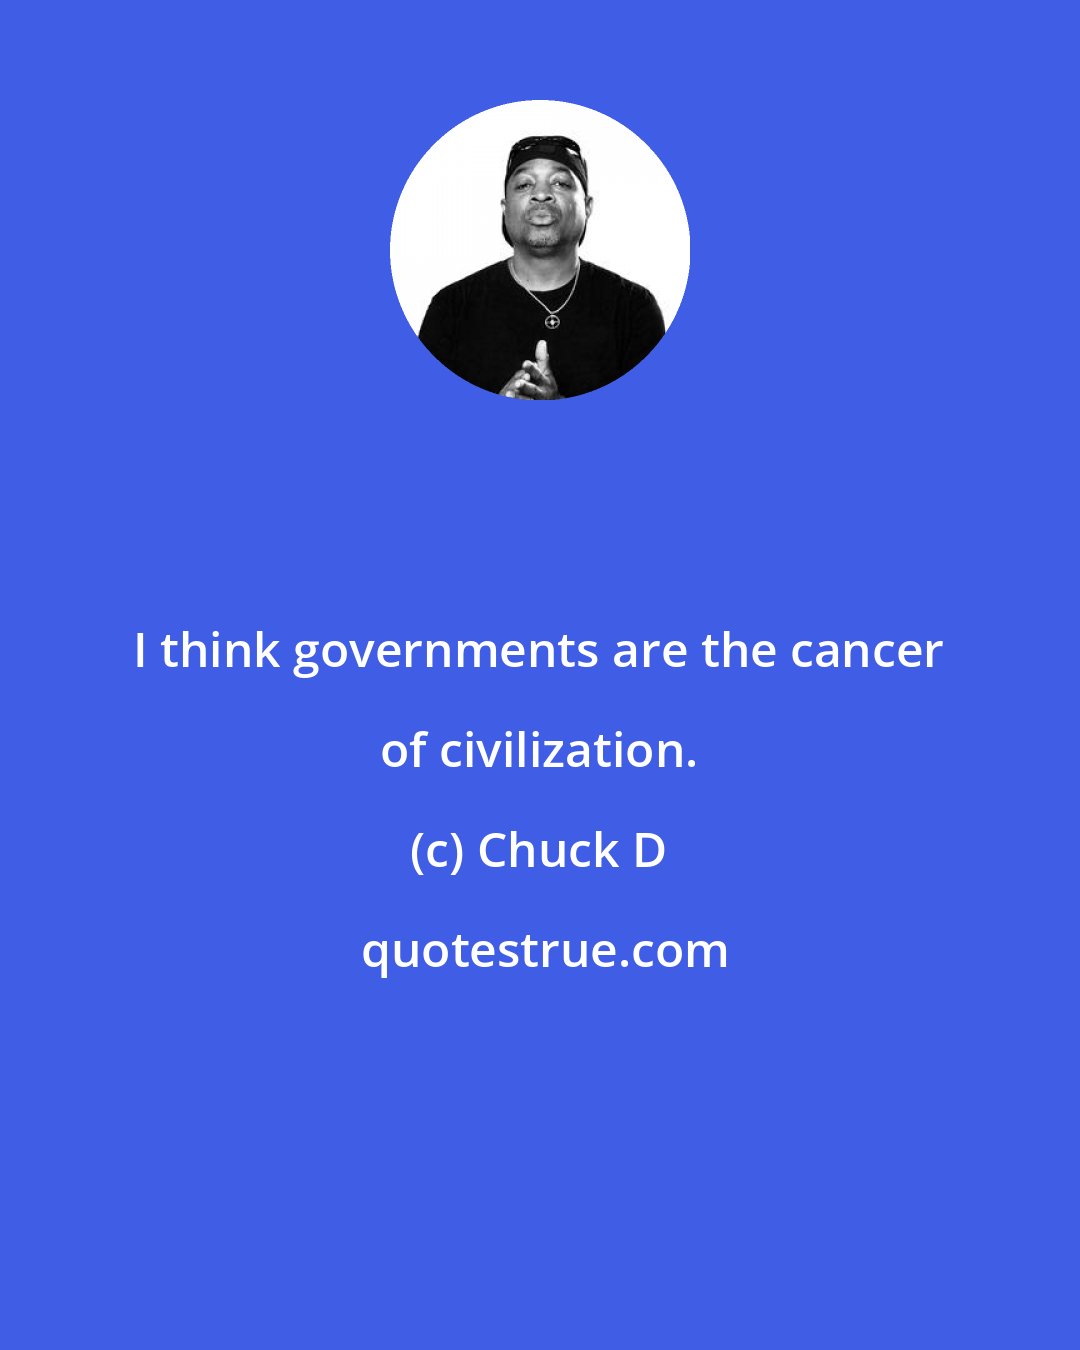 Chuck D: I think governments are the cancer of civilization.